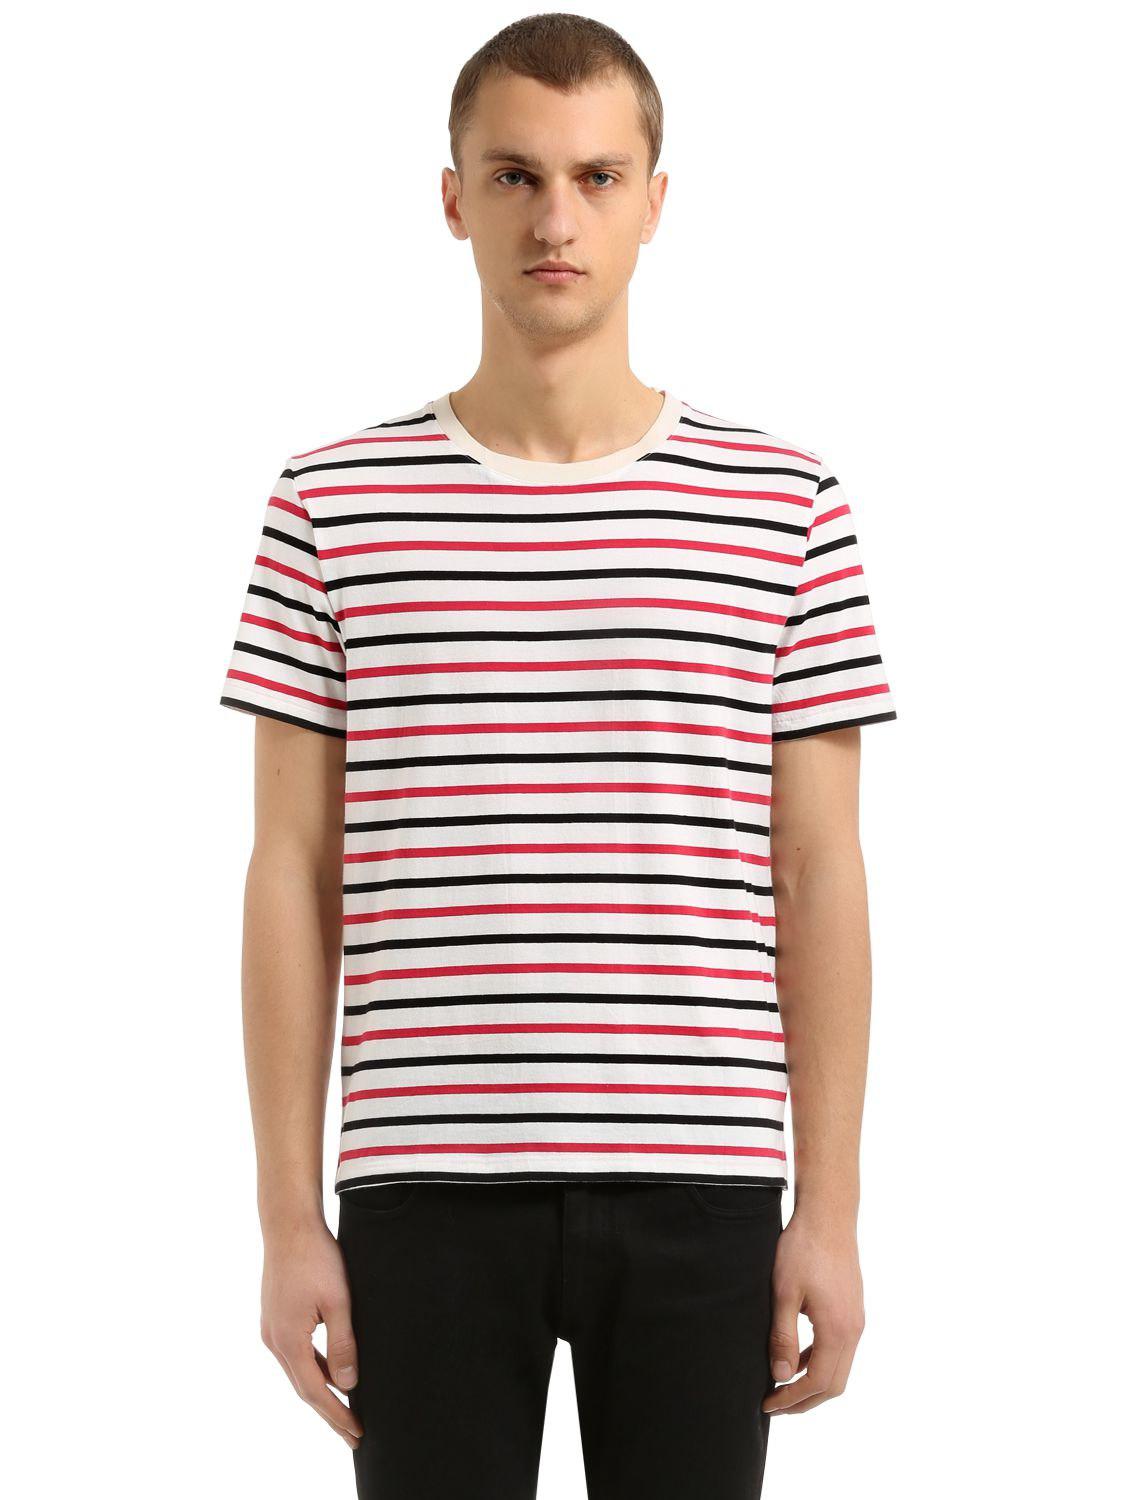 Lyst - Maison Margiela 3 Pack Of Striped Cotton Jersey T-shirts in ...